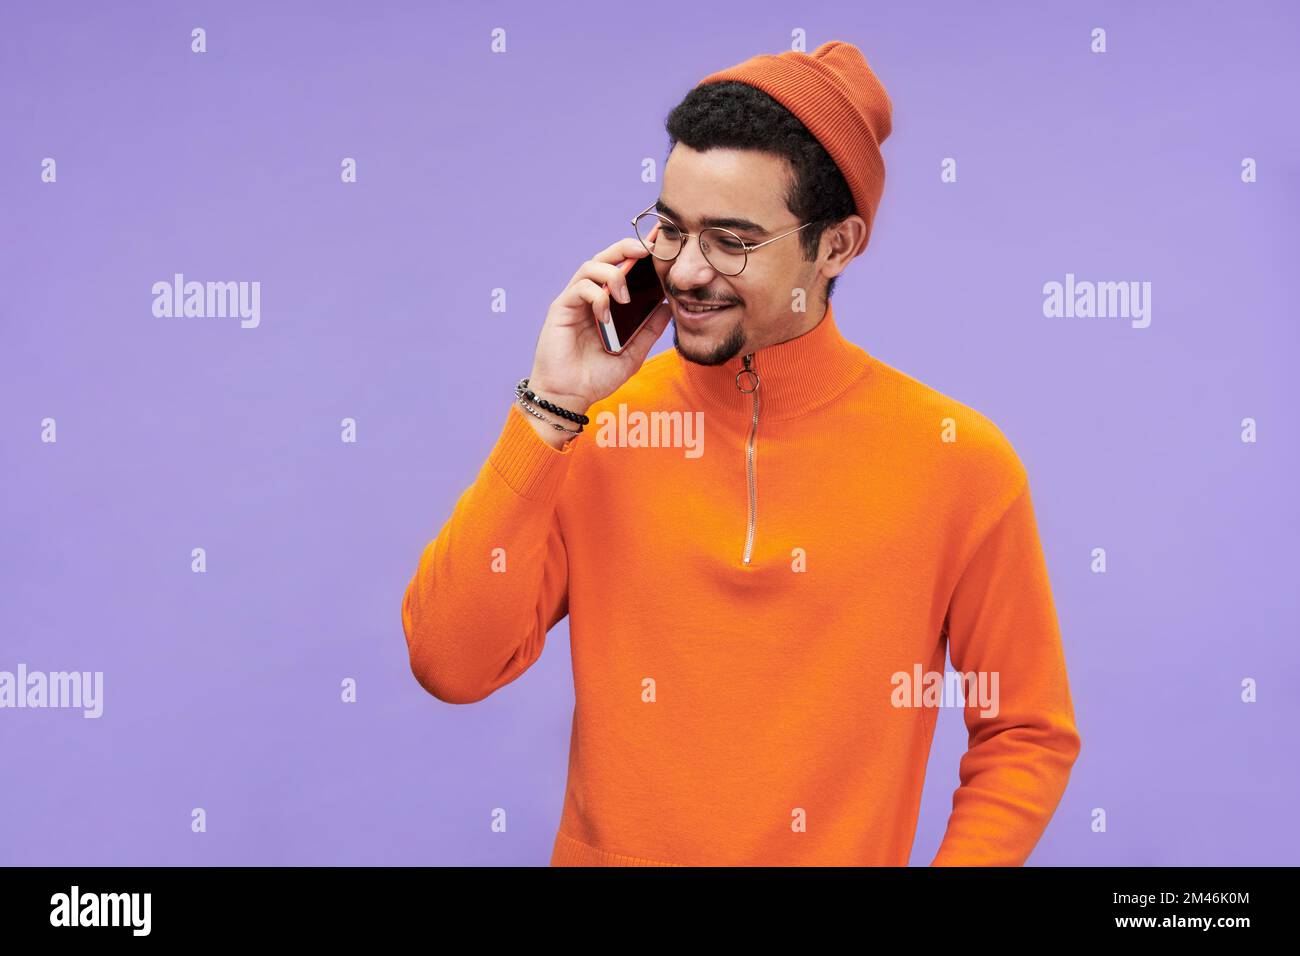 Happy guy in eyeglasses, orange pullover and beanie hat talking on mobile phone in front of camera against violet background Stock Photo